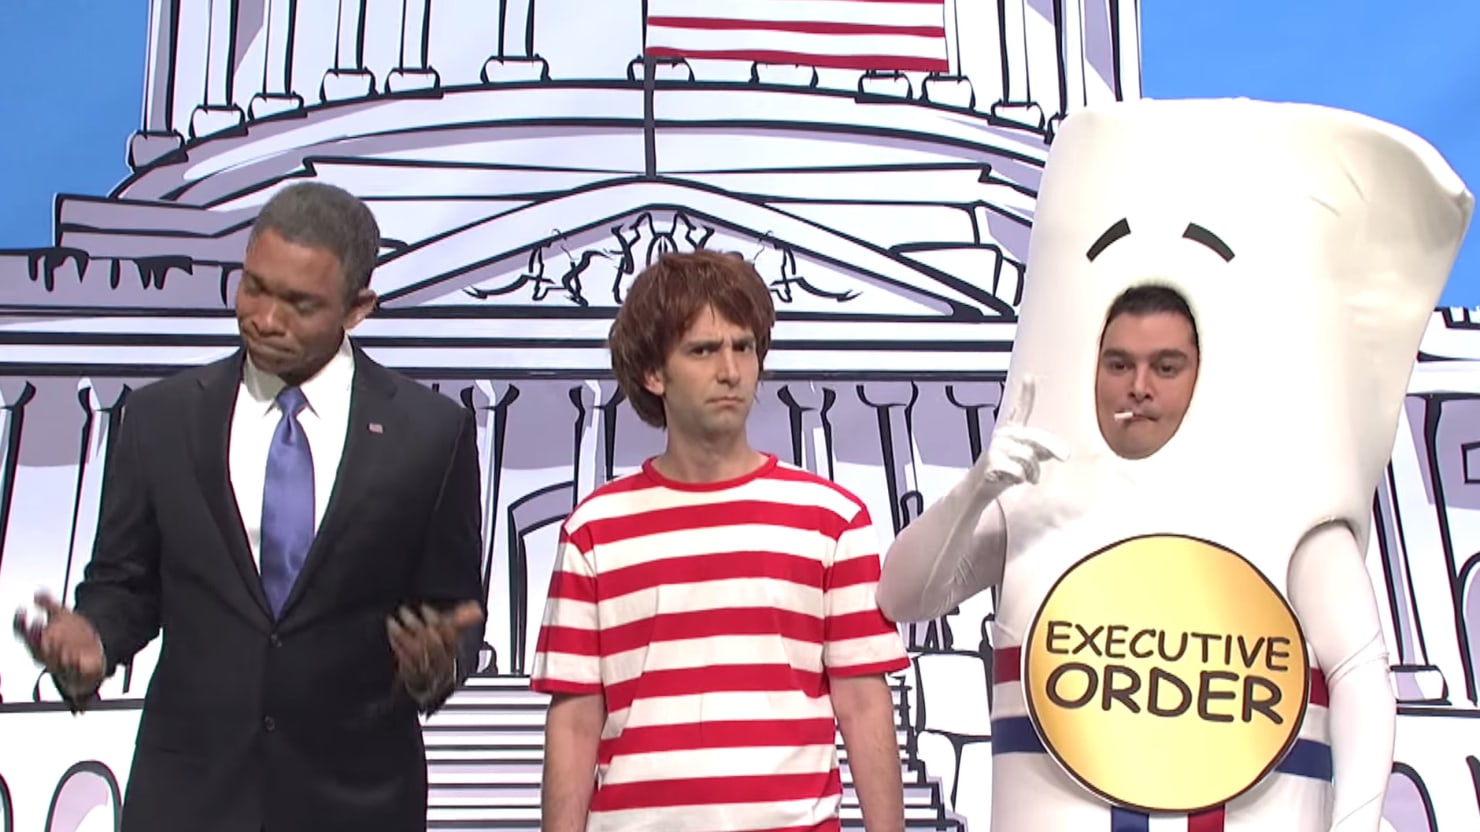 Snl Parodies Schoolhouse Rock Hilariously Gets A Lot Wrong 6700